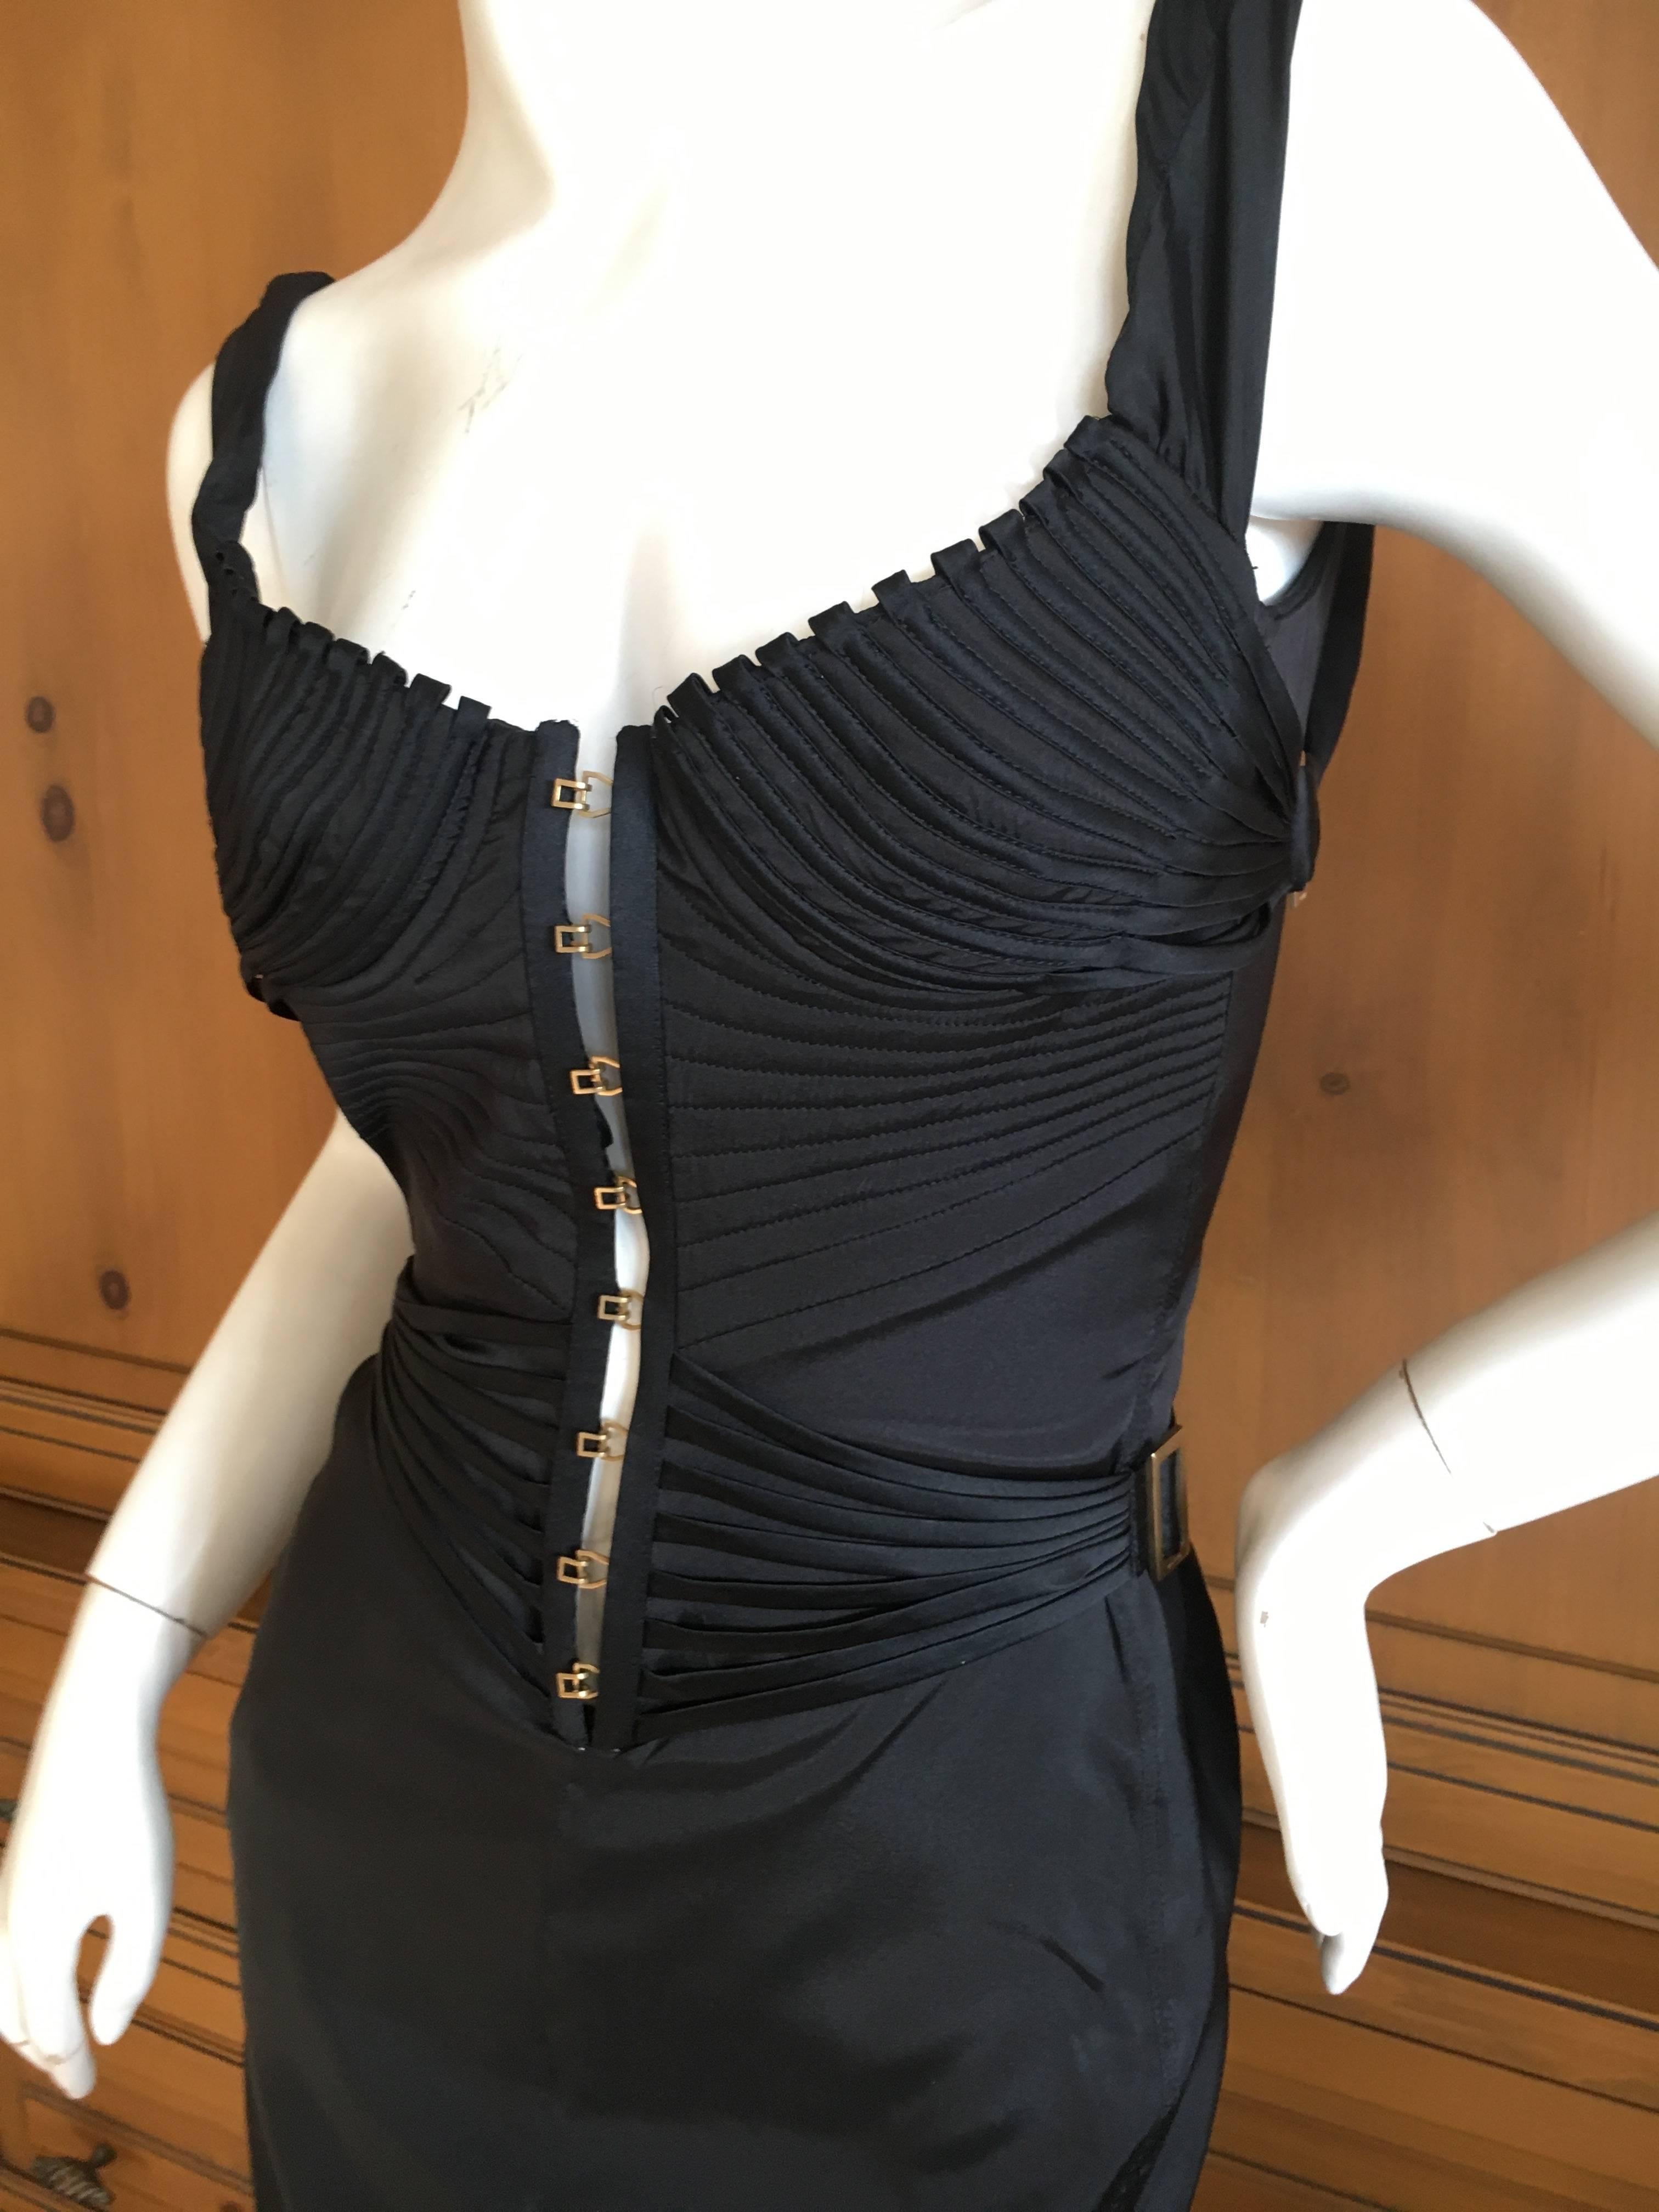 Gucci by Tom Ford Black Corset Dress Tom Ford Book Dress on SJP 1